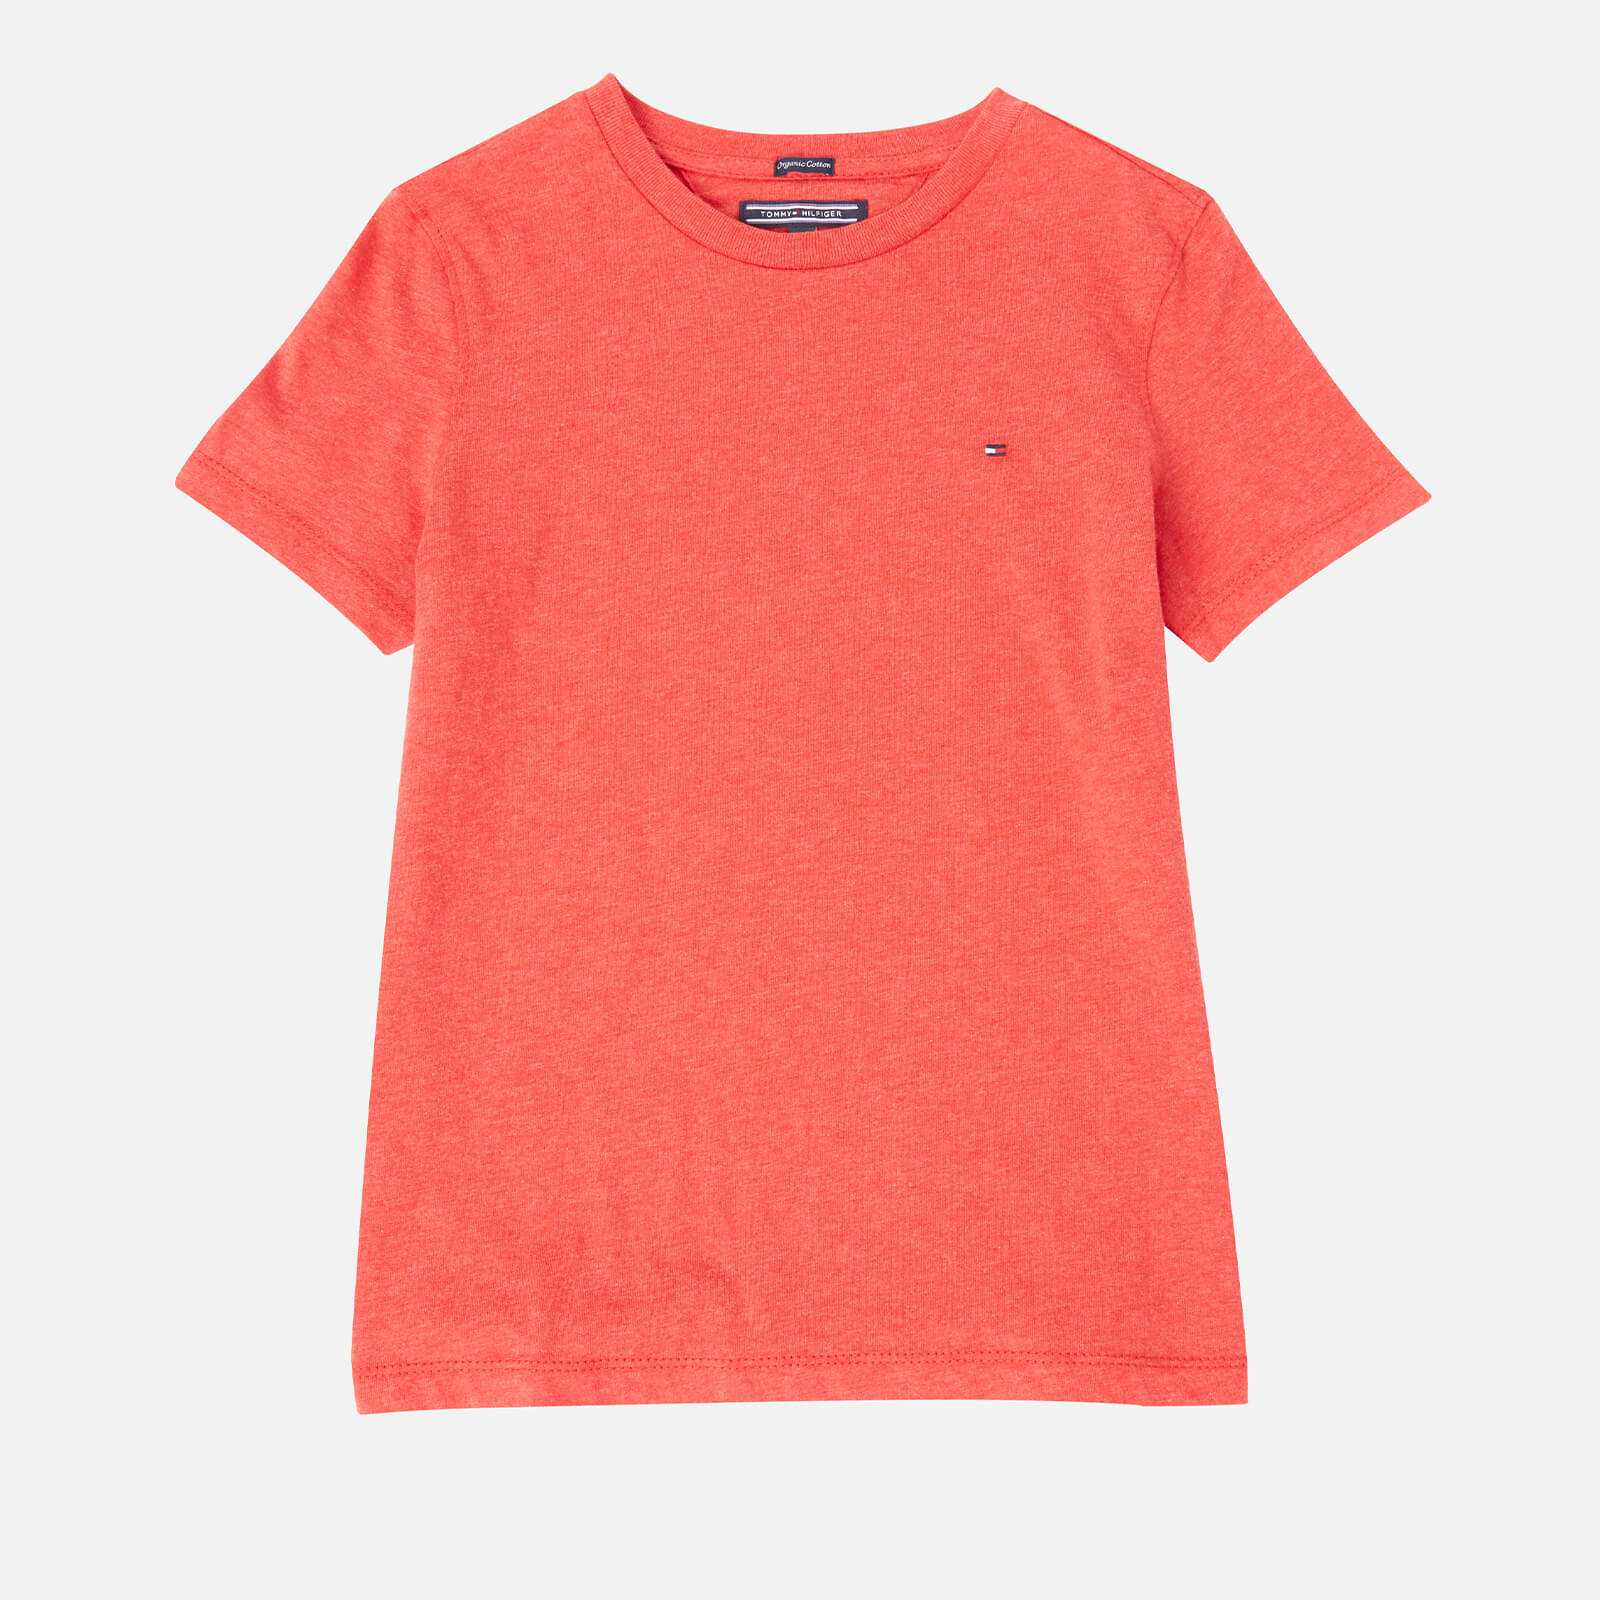 Tommy Hilfiger Boys' Basic Short Sleeve T-Shirt - Apple Red Heather - 7 Years